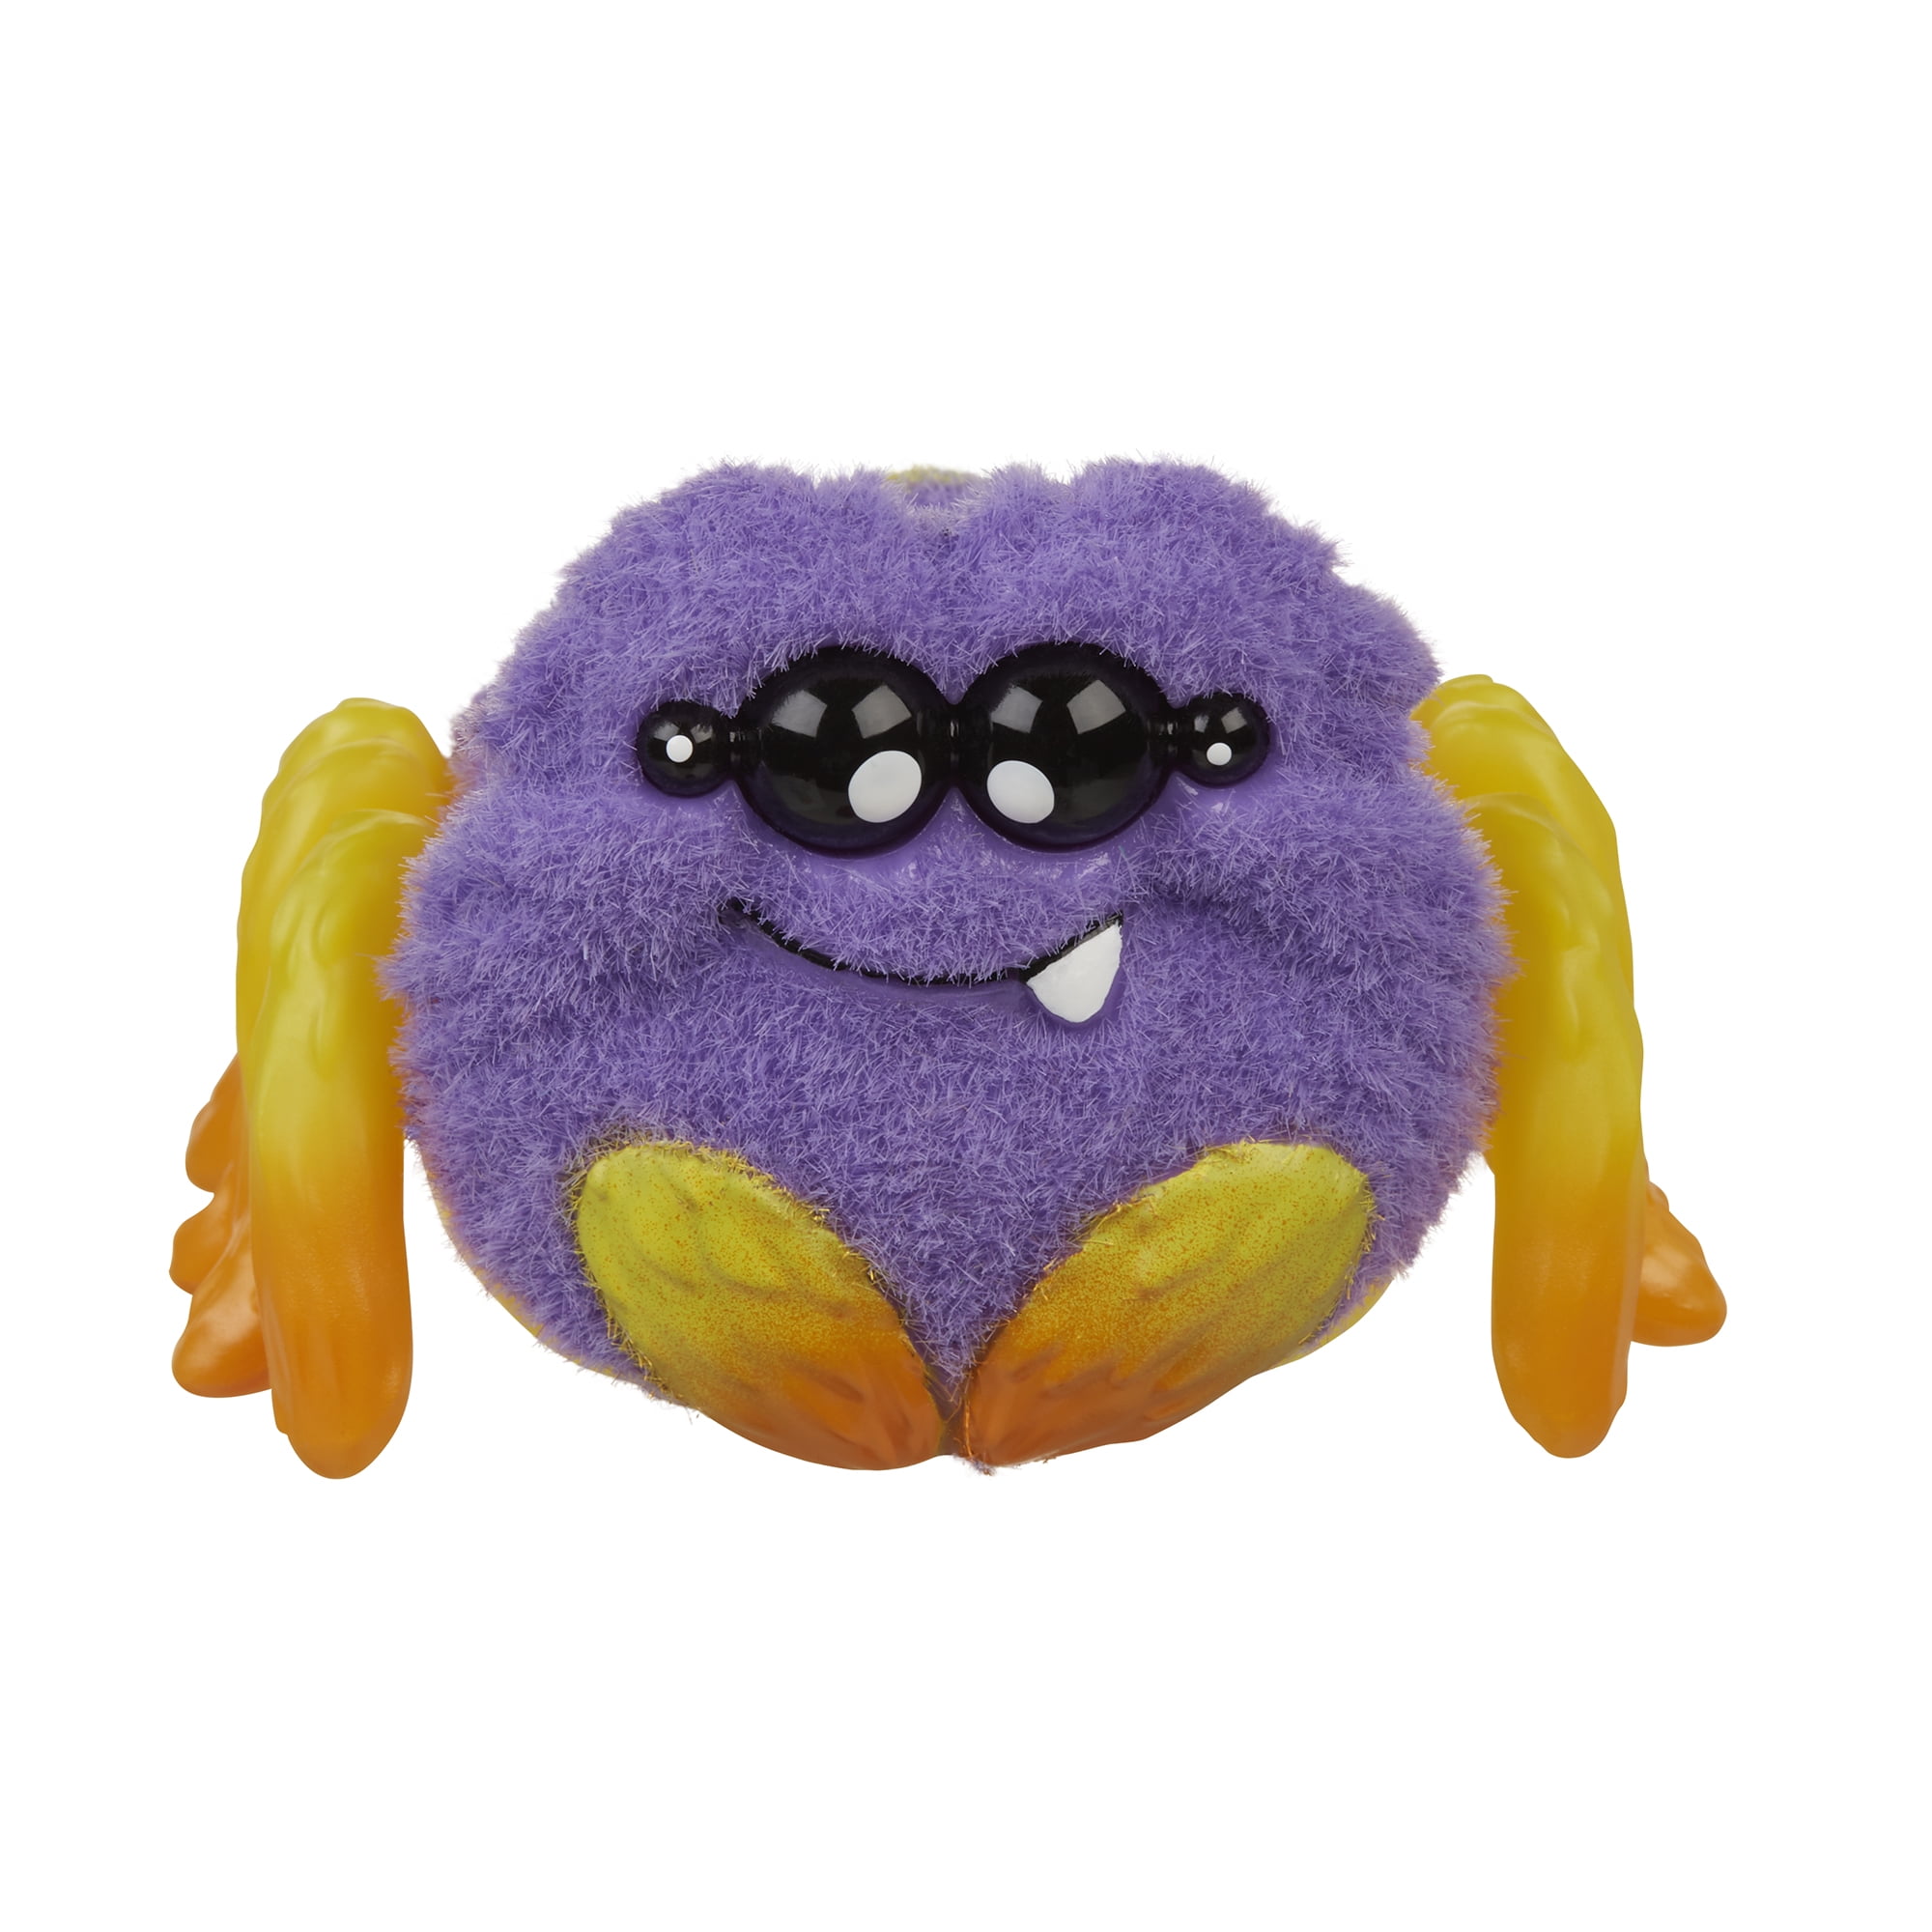 Yellies TOOFY SPOODER PURPLE Voice-Activated Spider Pet BRAND NEW HOT TOY 